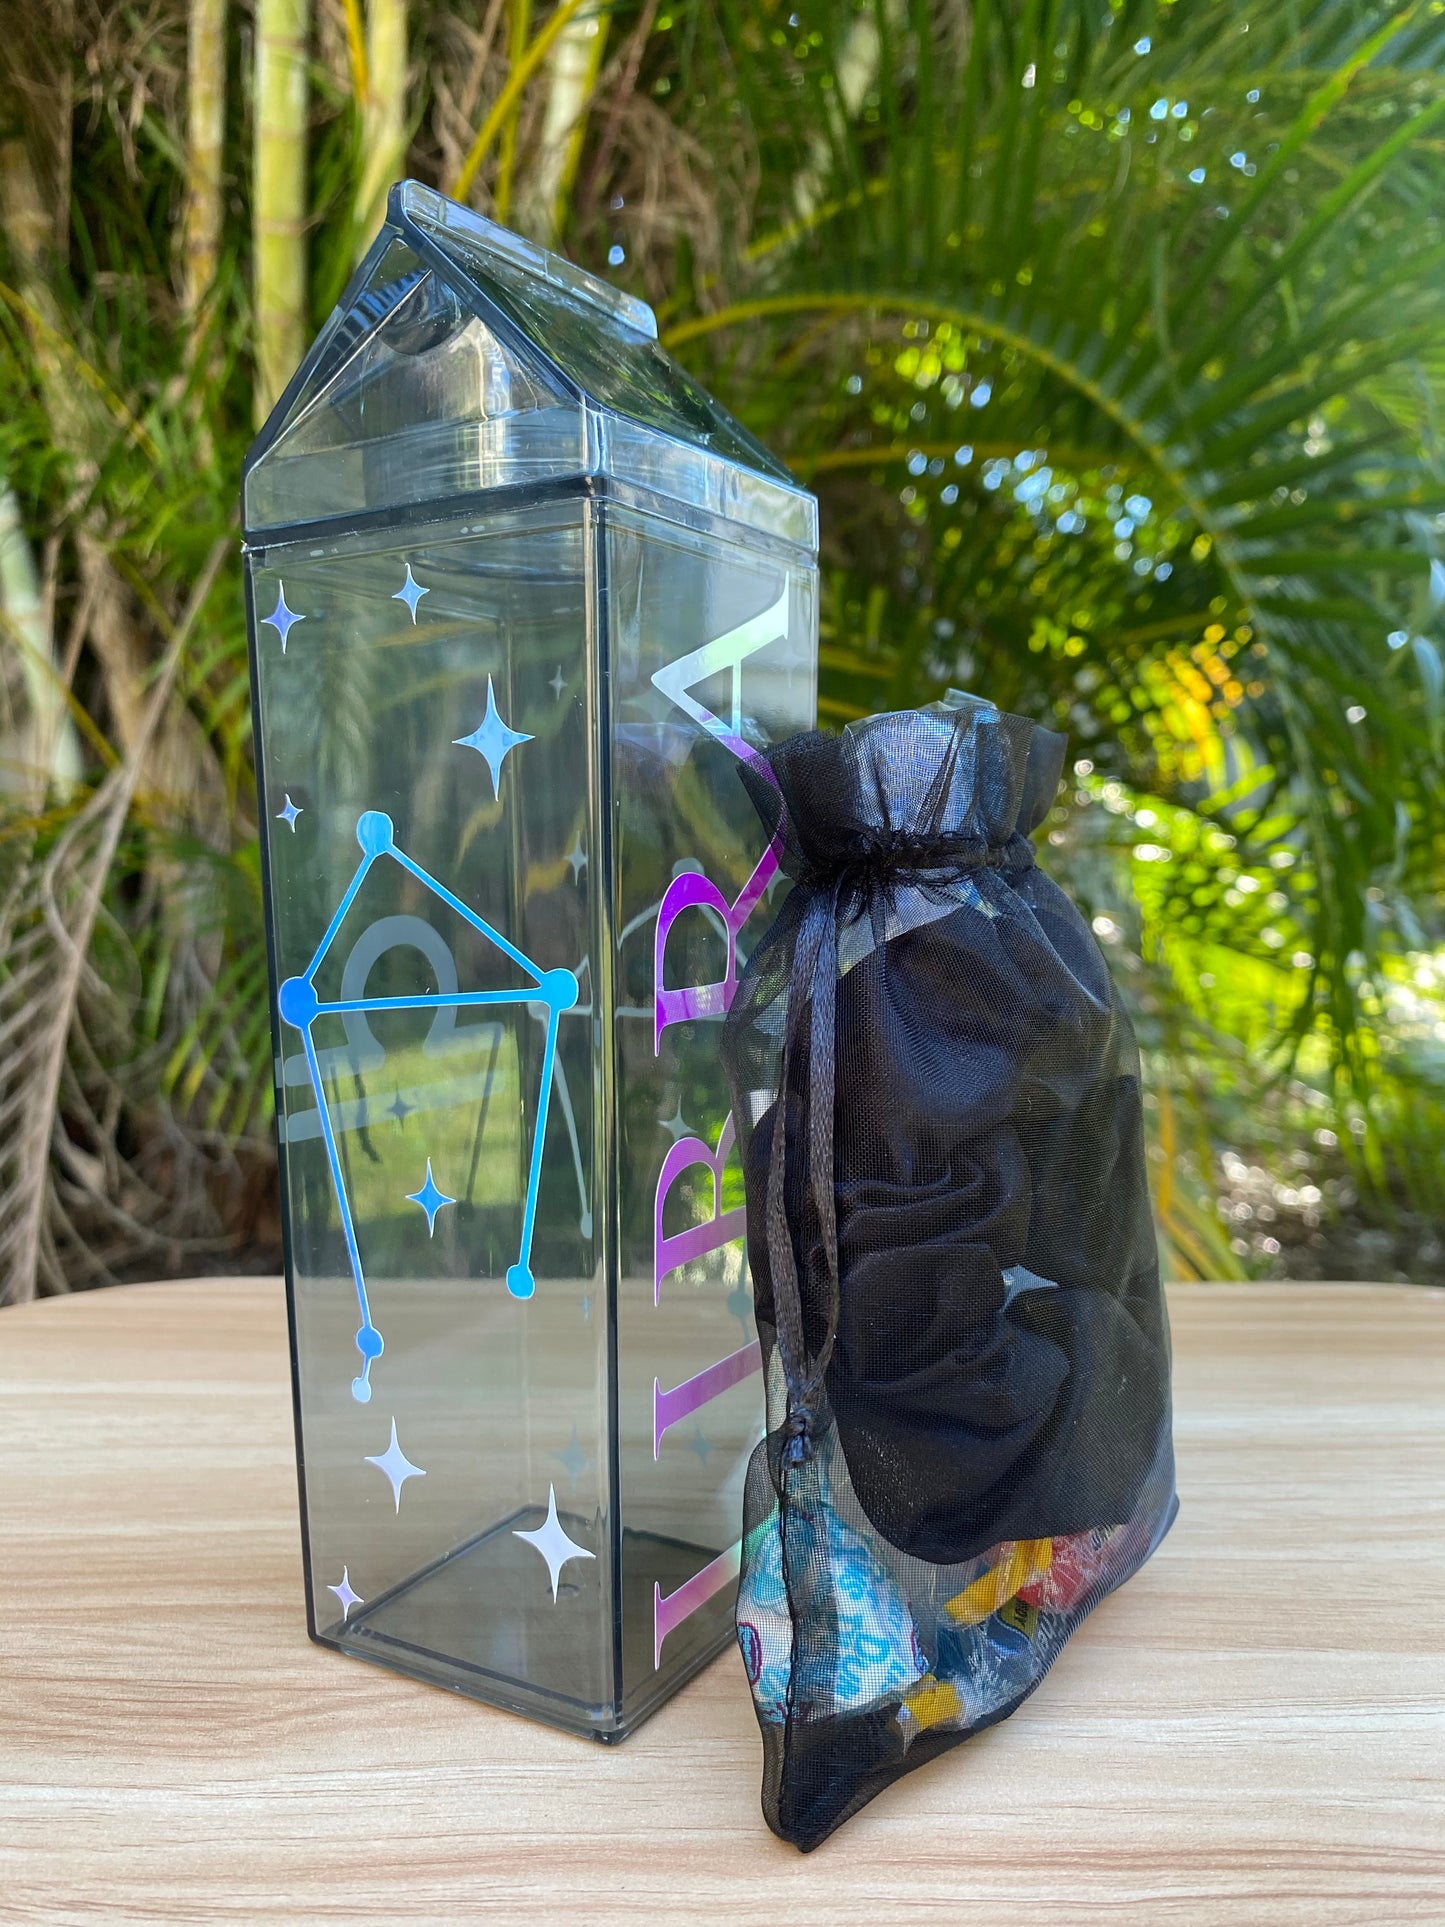 Caticorn Holographic Water Bottle